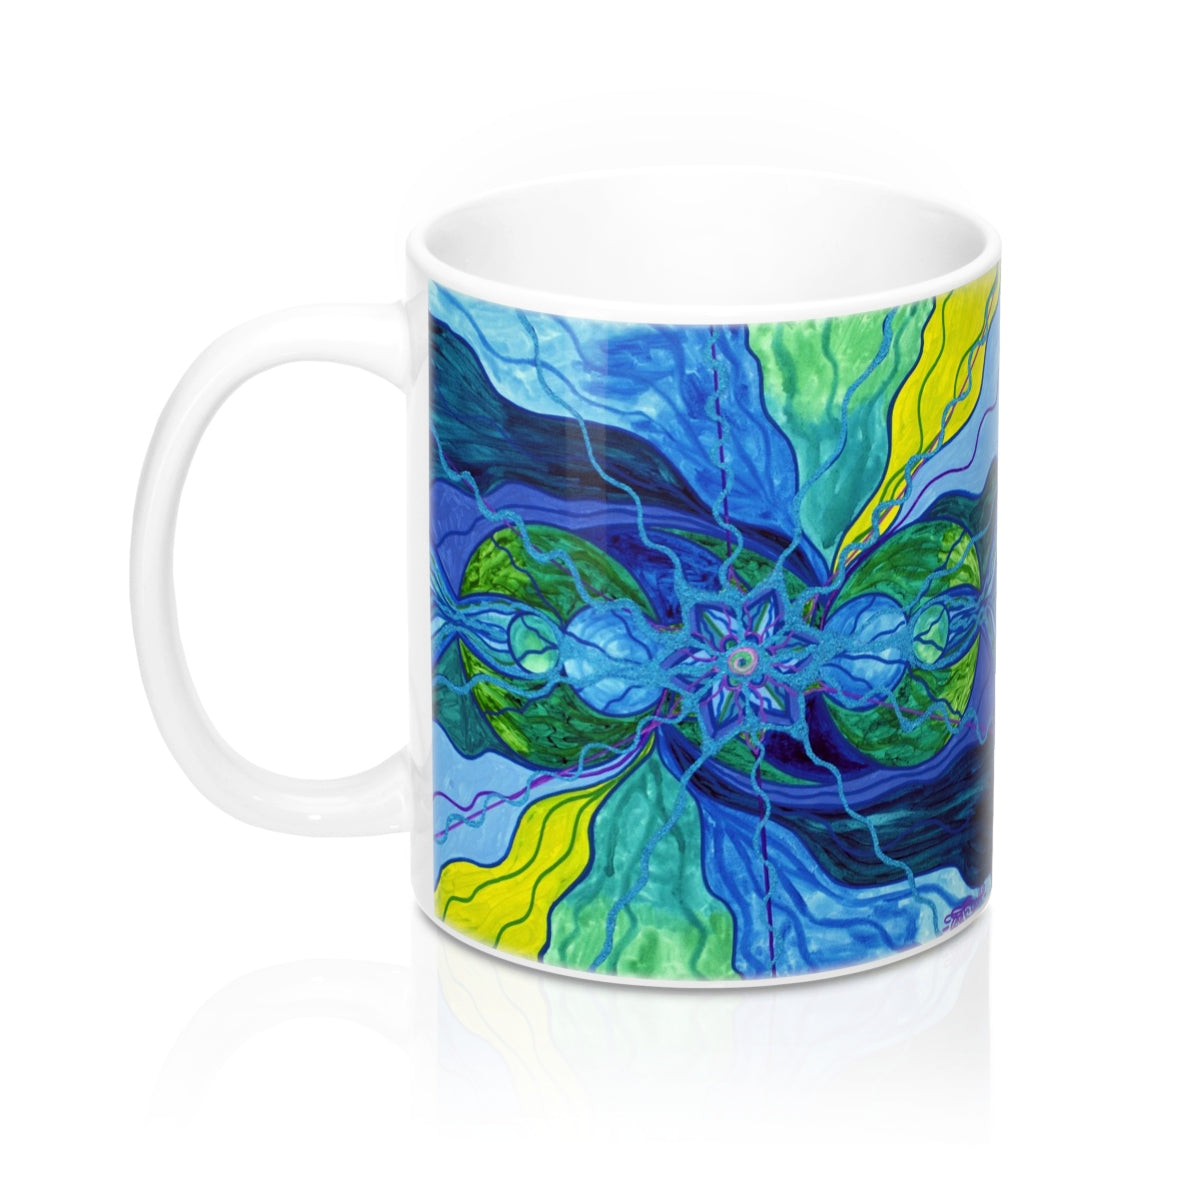 the-worlds-best-authentic-tranquility-mug-hot-on-sale_2.jpg